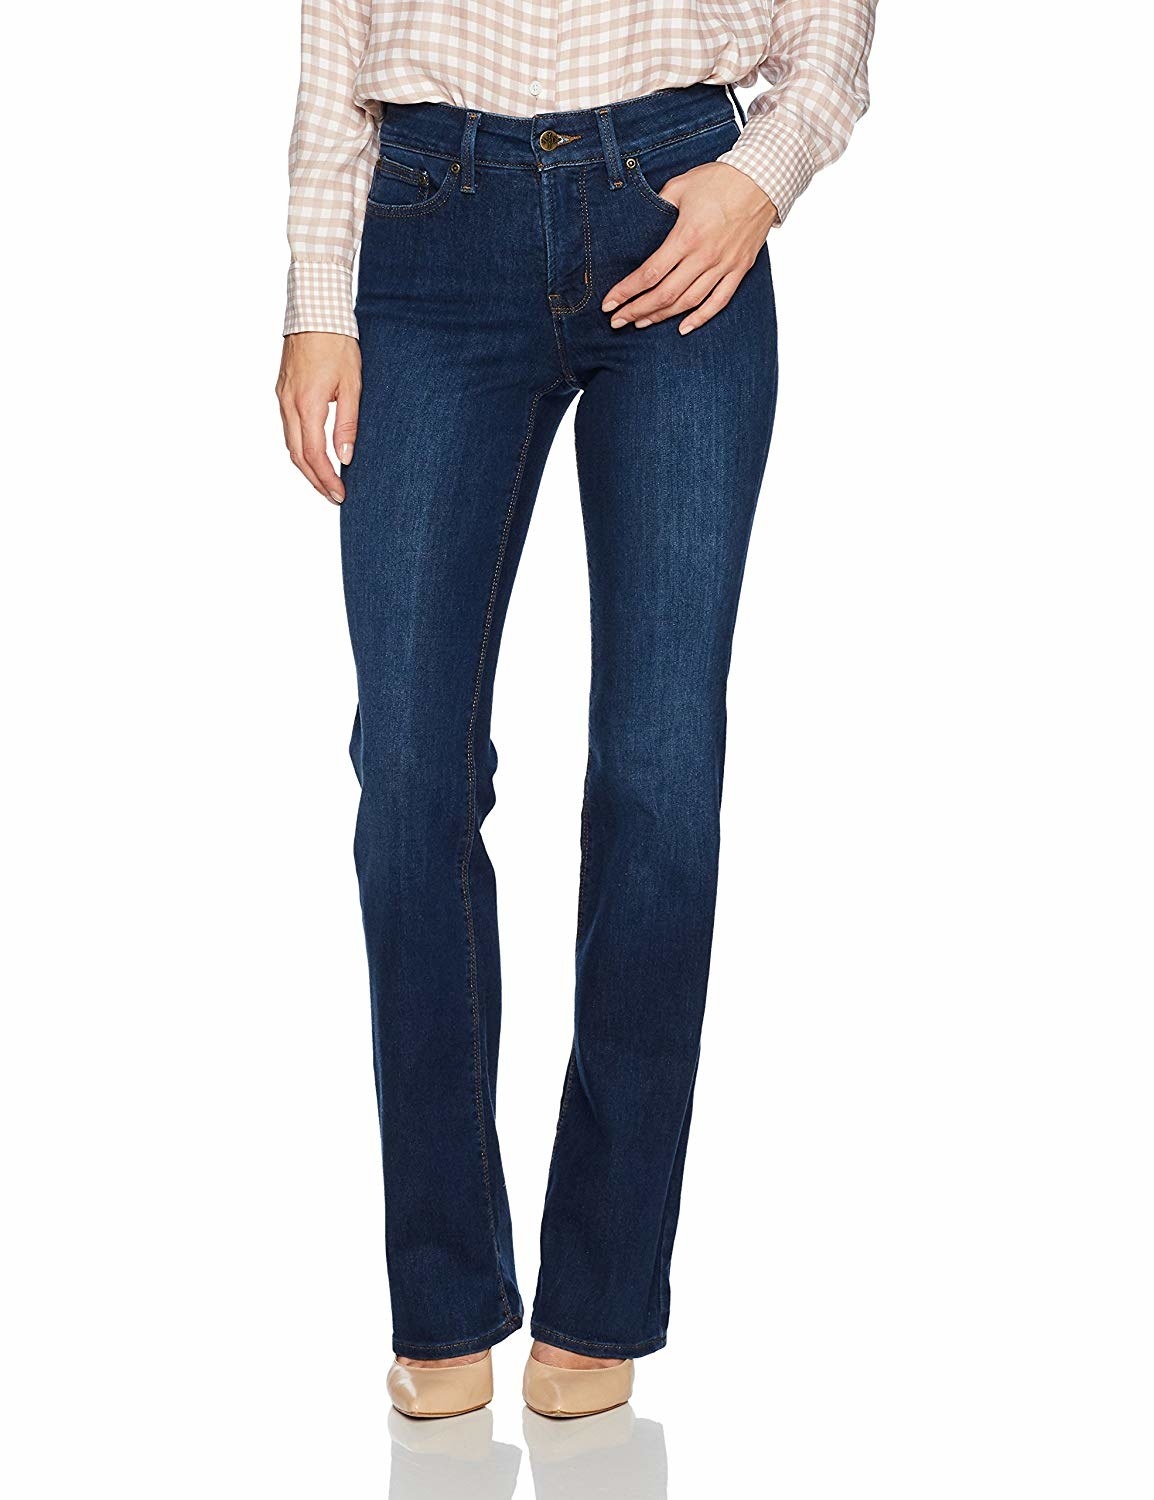 17 Pairs Of Jeans That'll Make You Forget All About Leggings